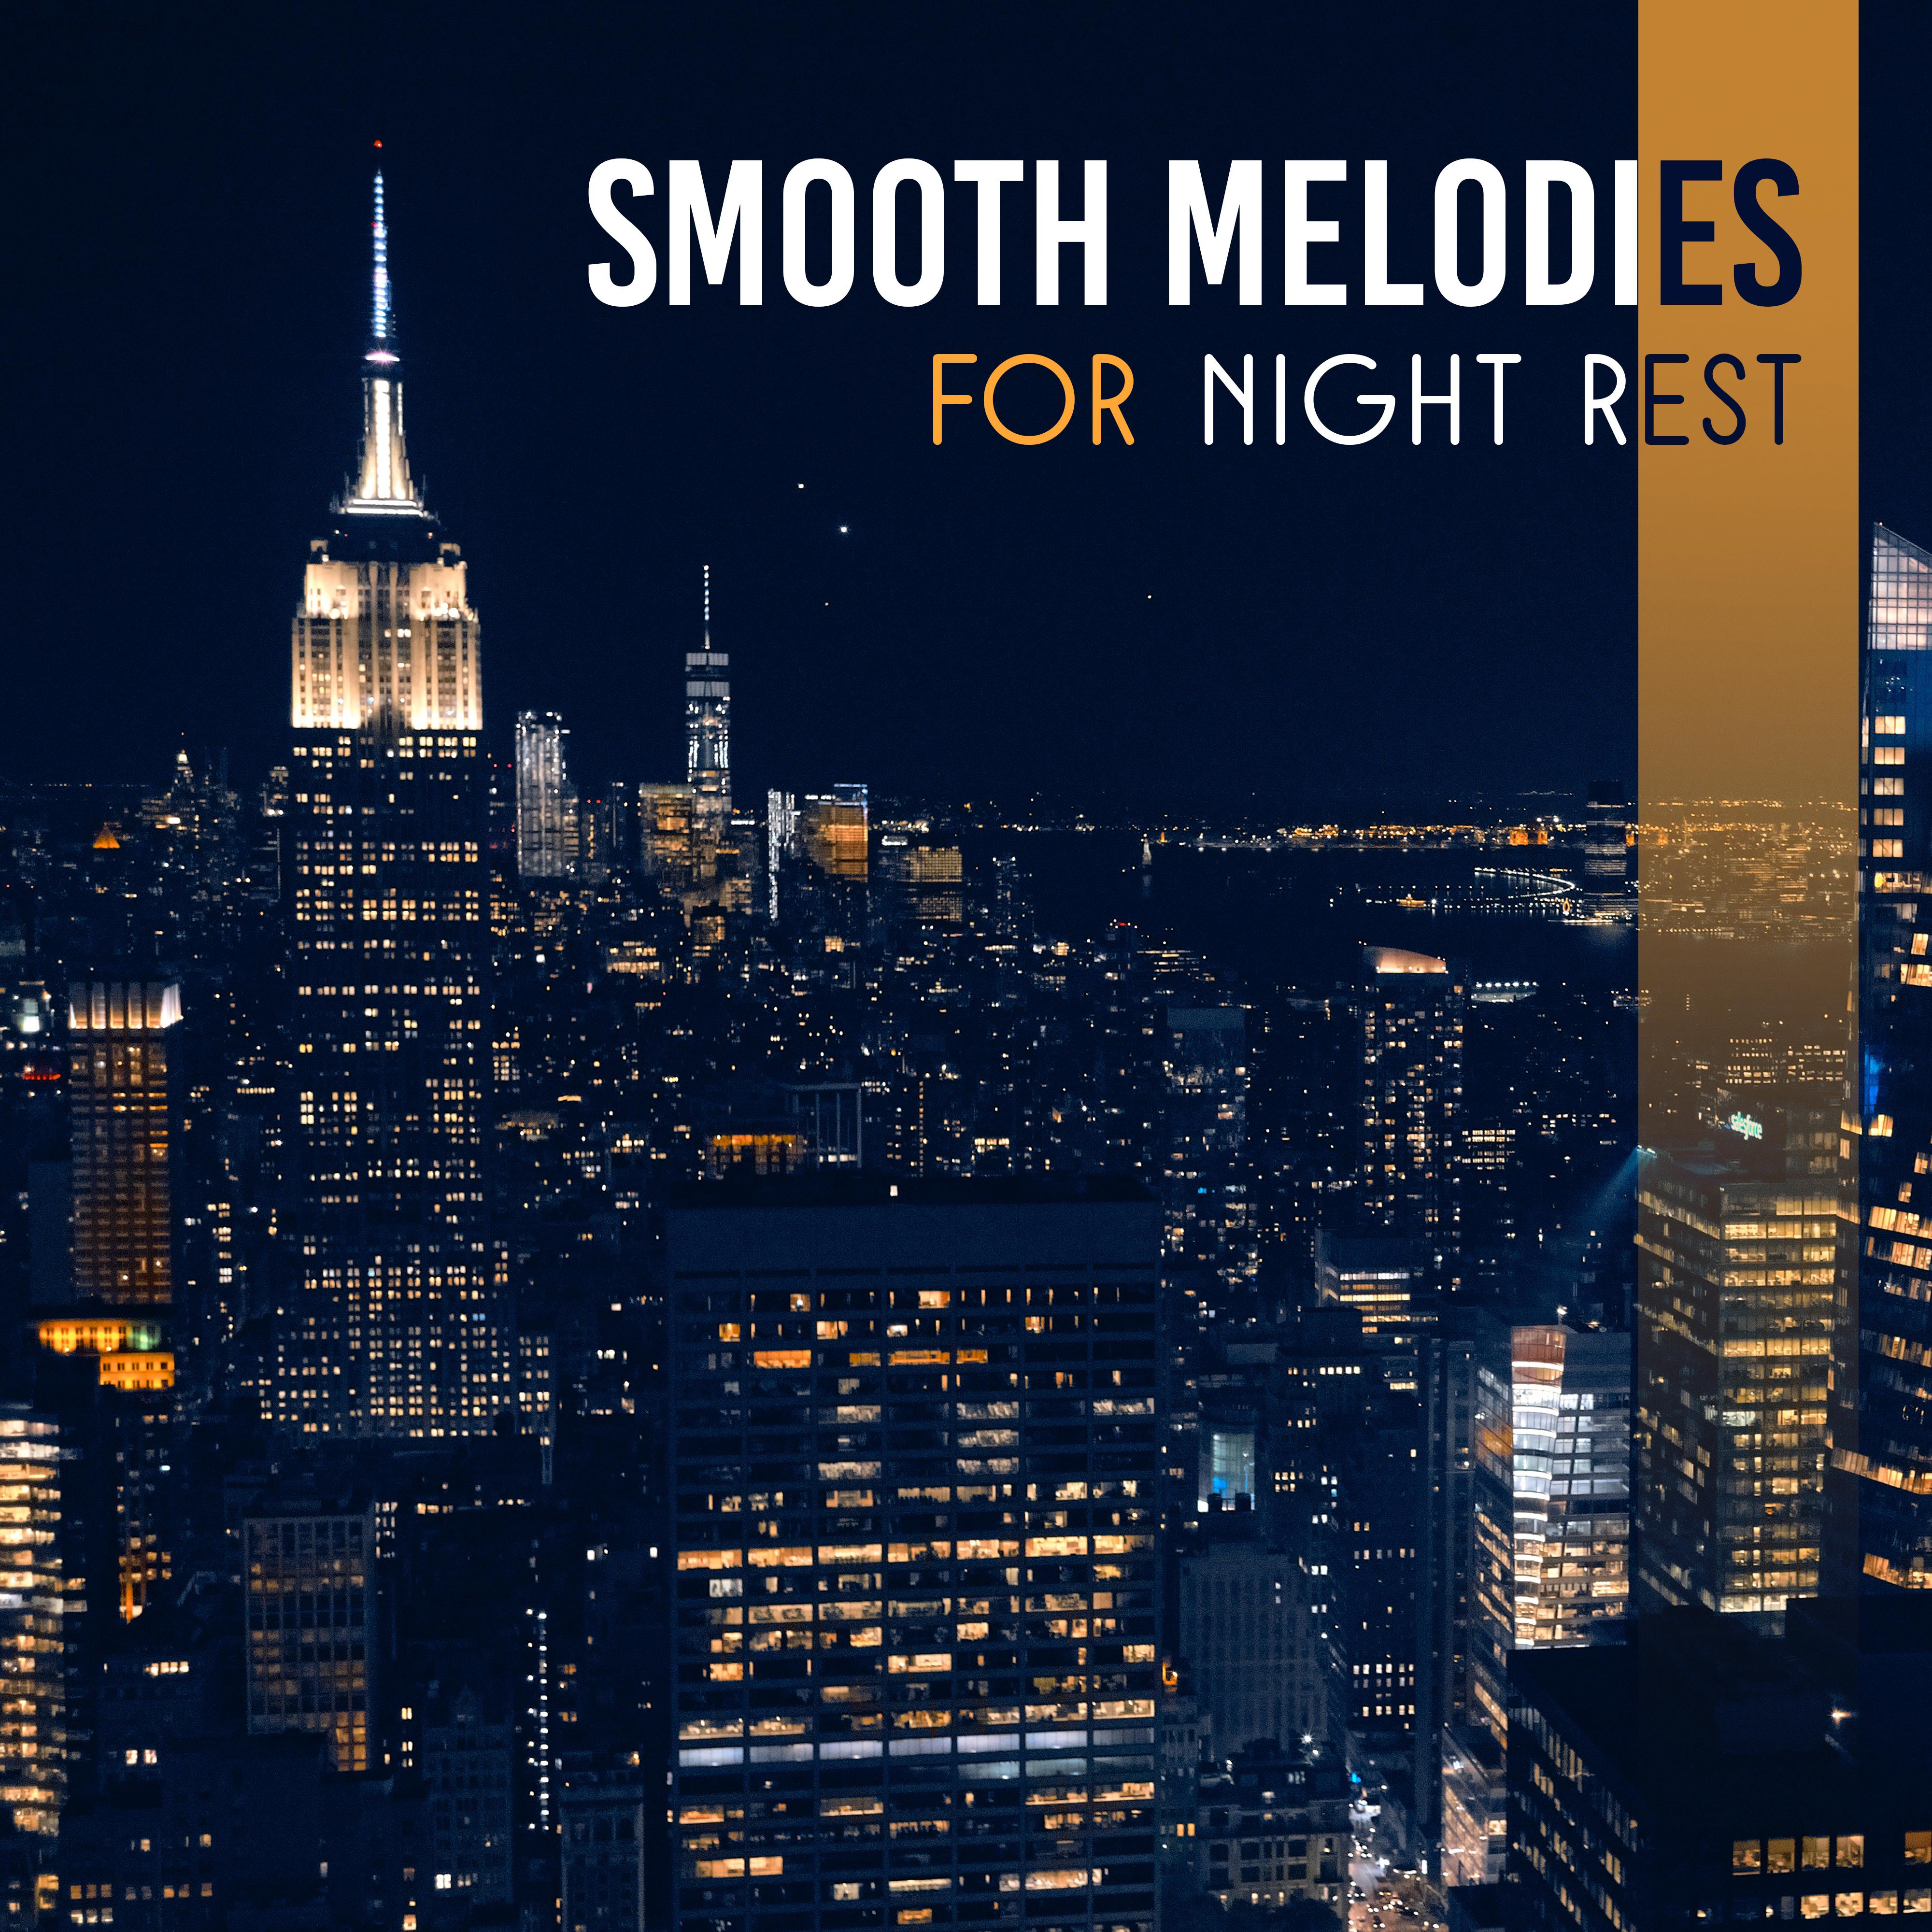 Smooth Melodies for Night Rest